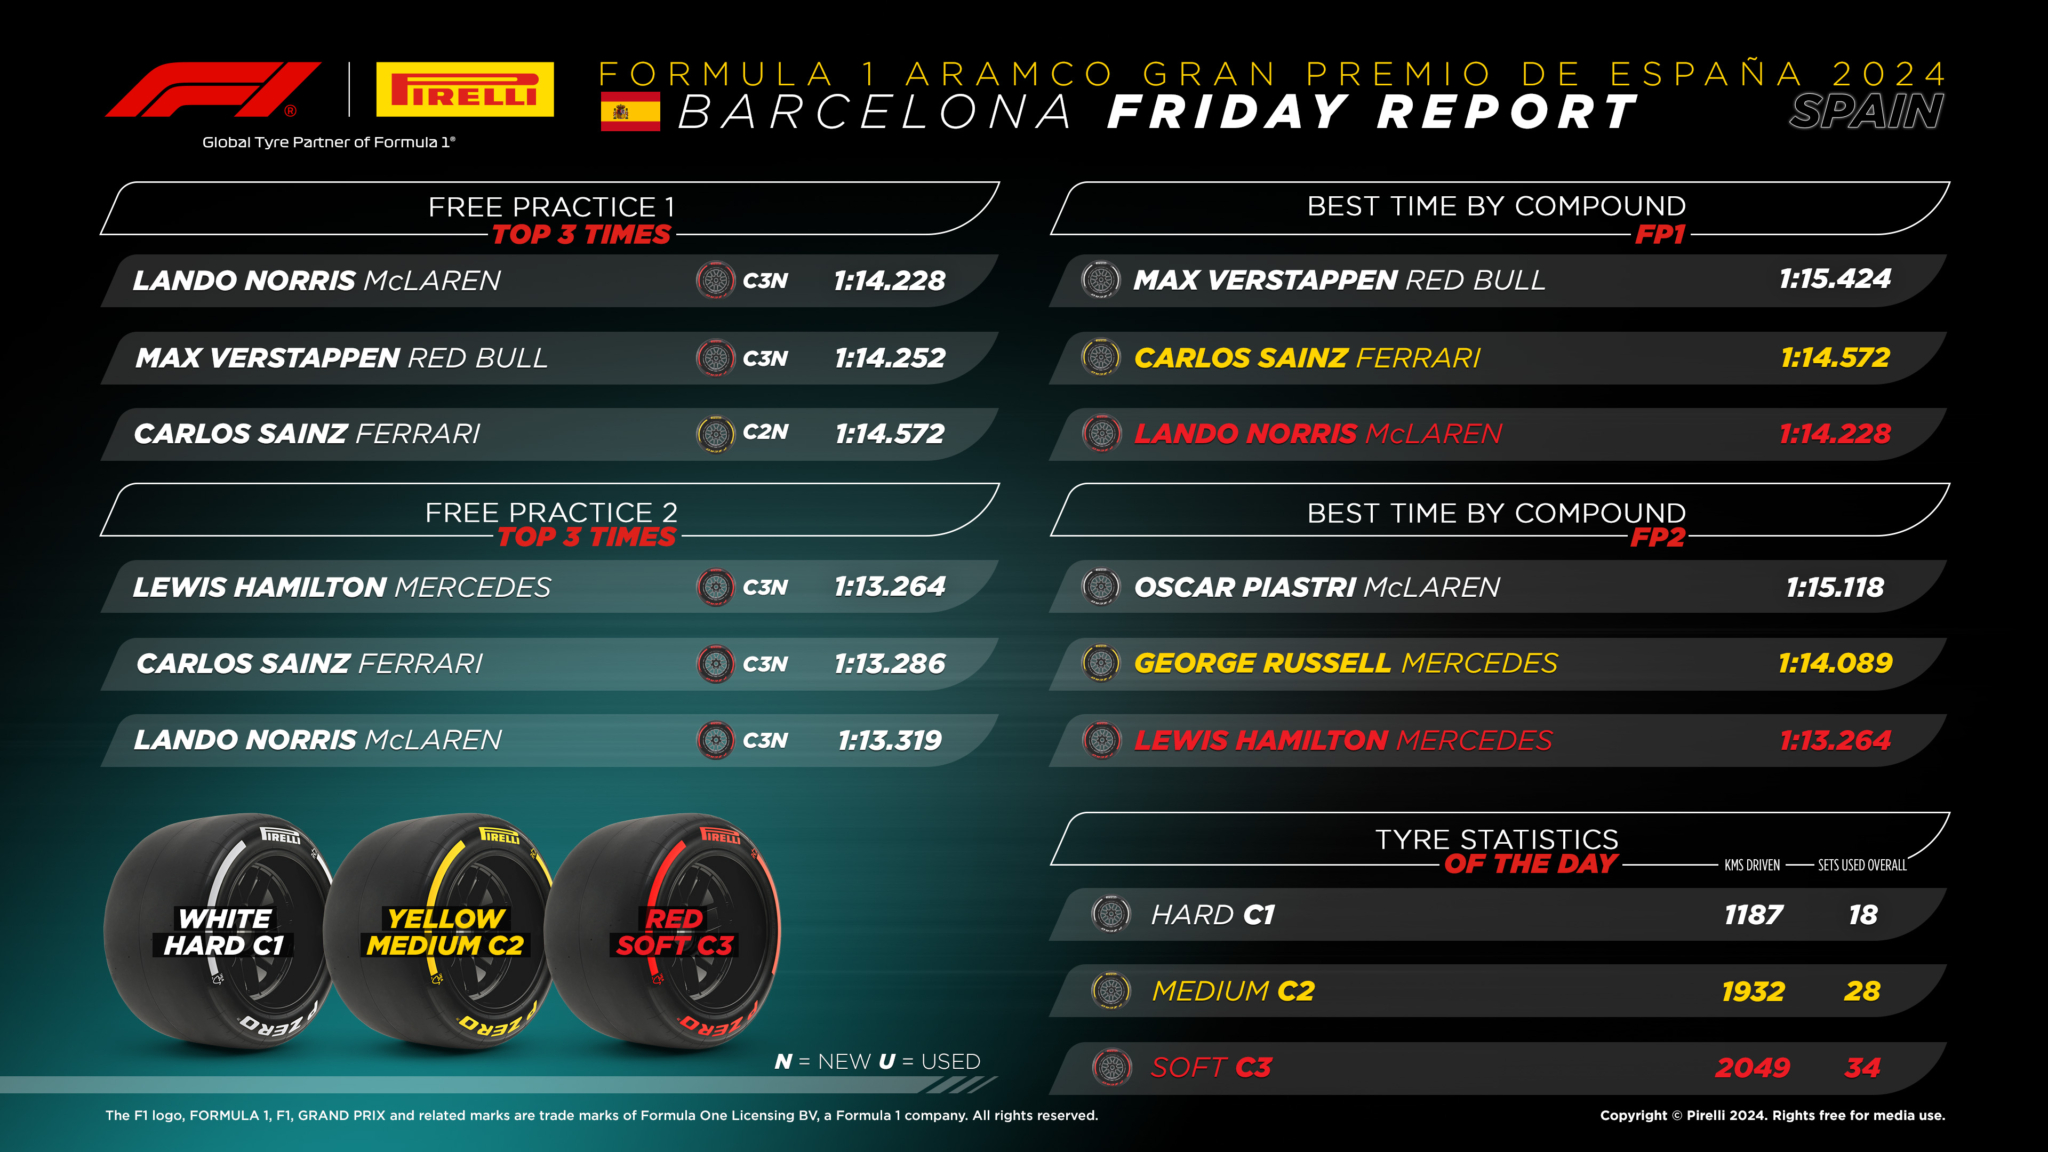 Pirelli – 5 F1 drivers and teams ‘evenly matched’ in Barcelona grand prix practice